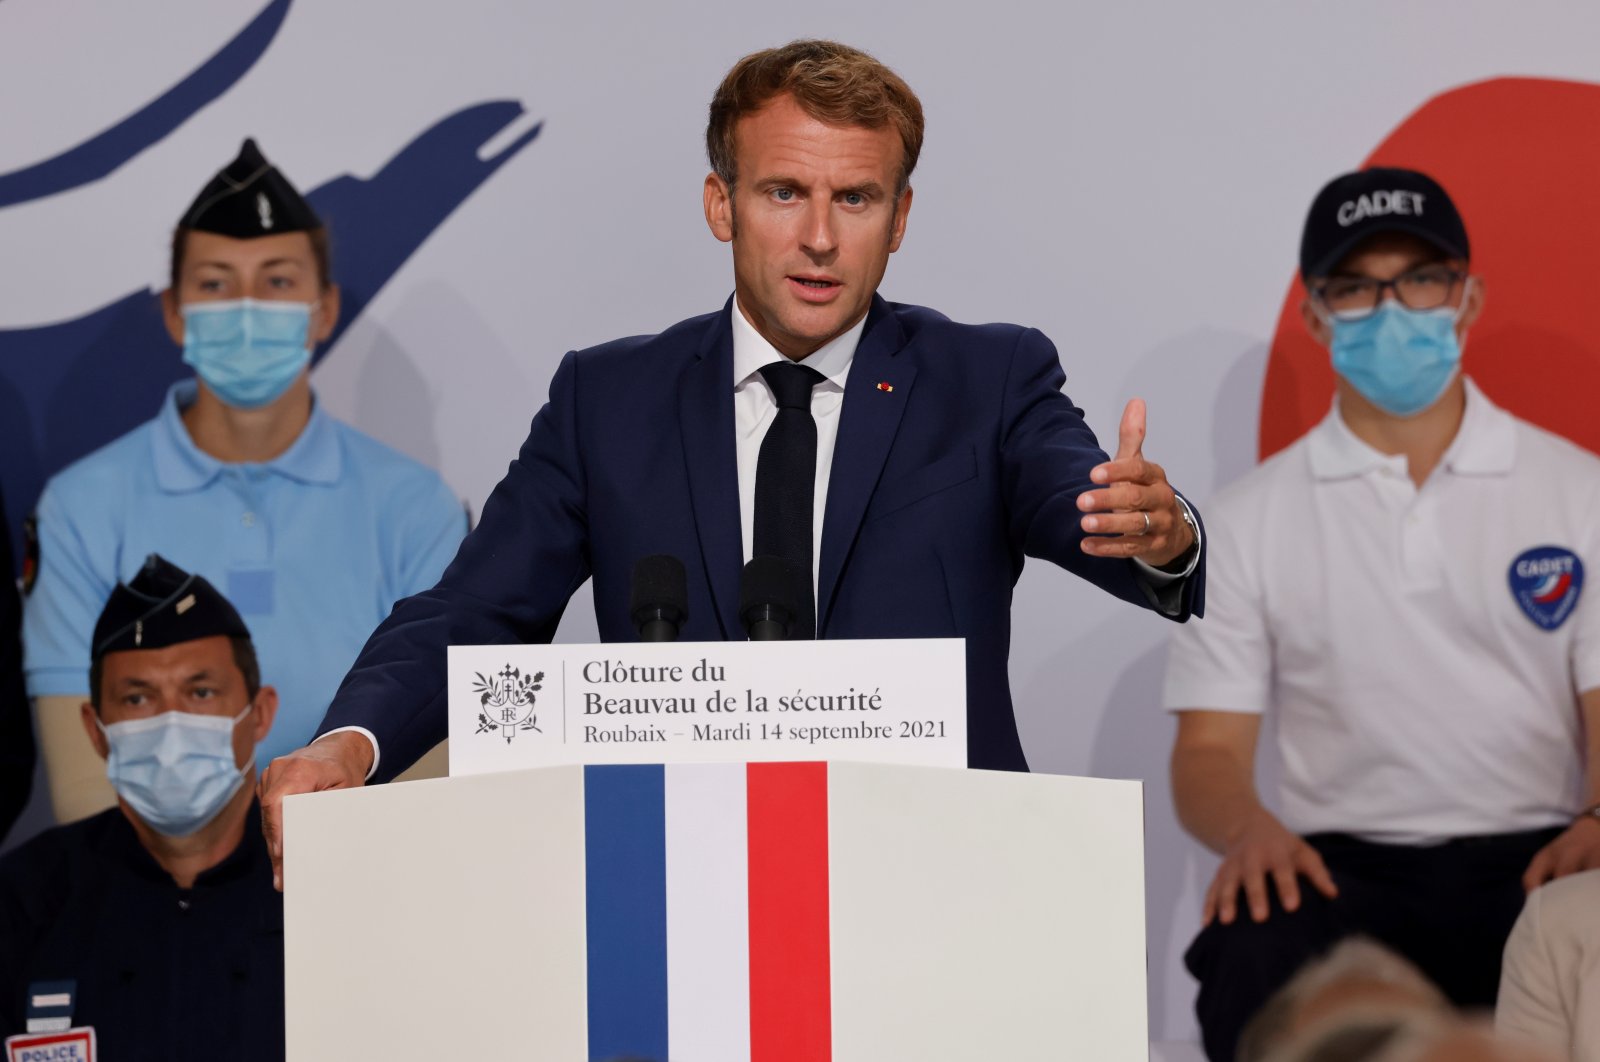 French President Emmanuel Macron delivers a speech during his visit to the police academy in Roubaix, France, Sept. 14, 2021. (Reuters Photo)